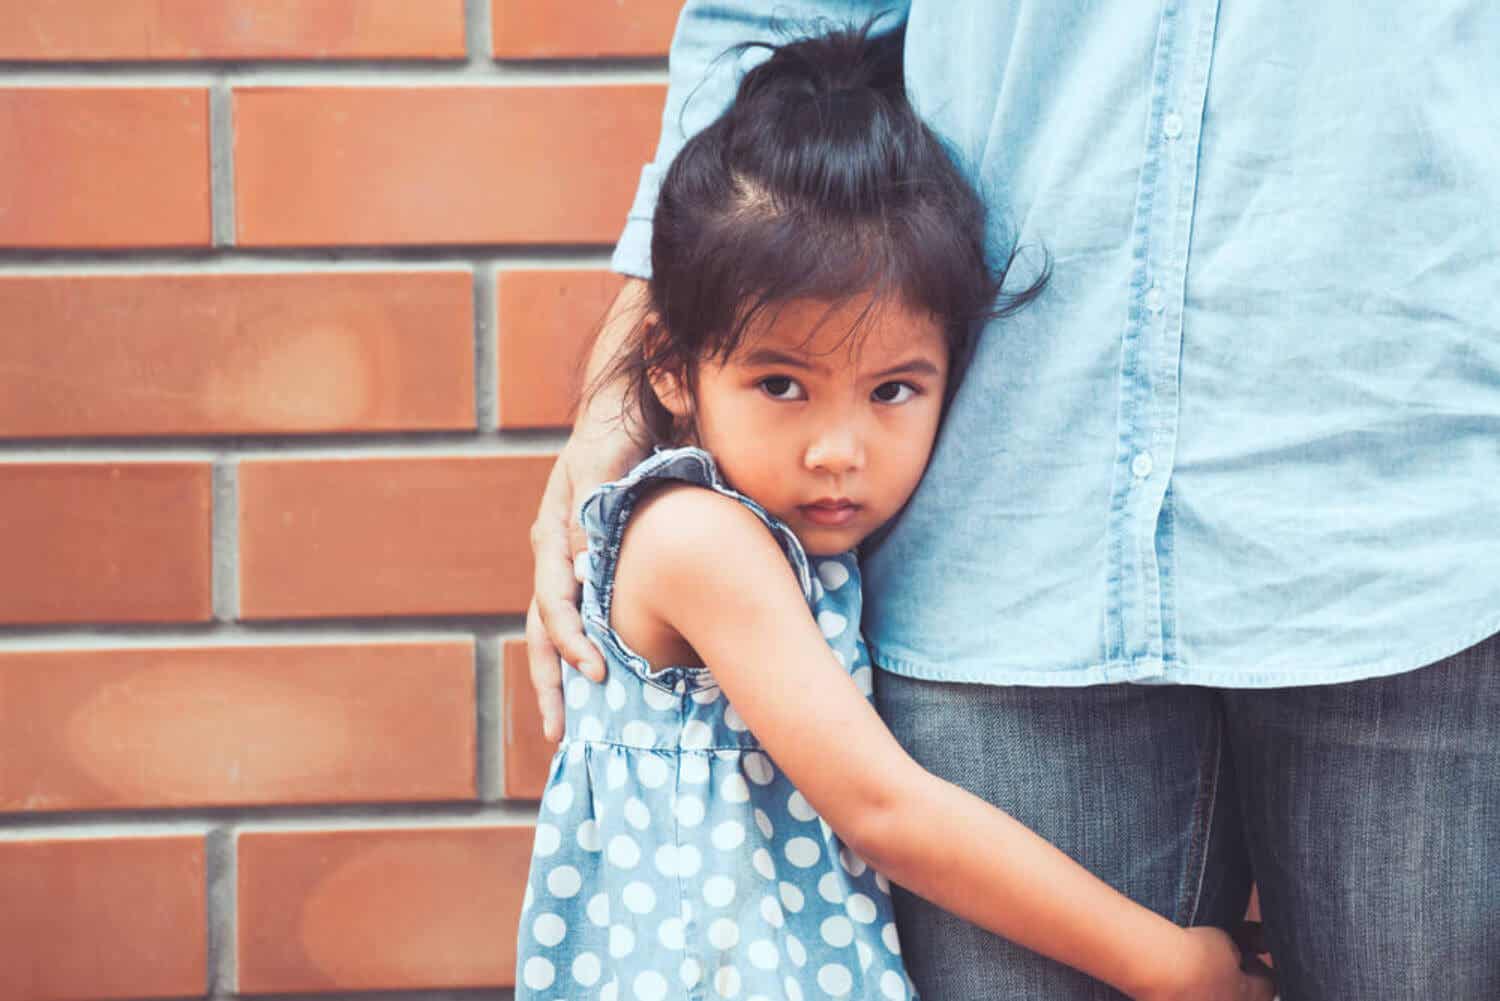 A small child hugging her parent's leg, looking afraid.